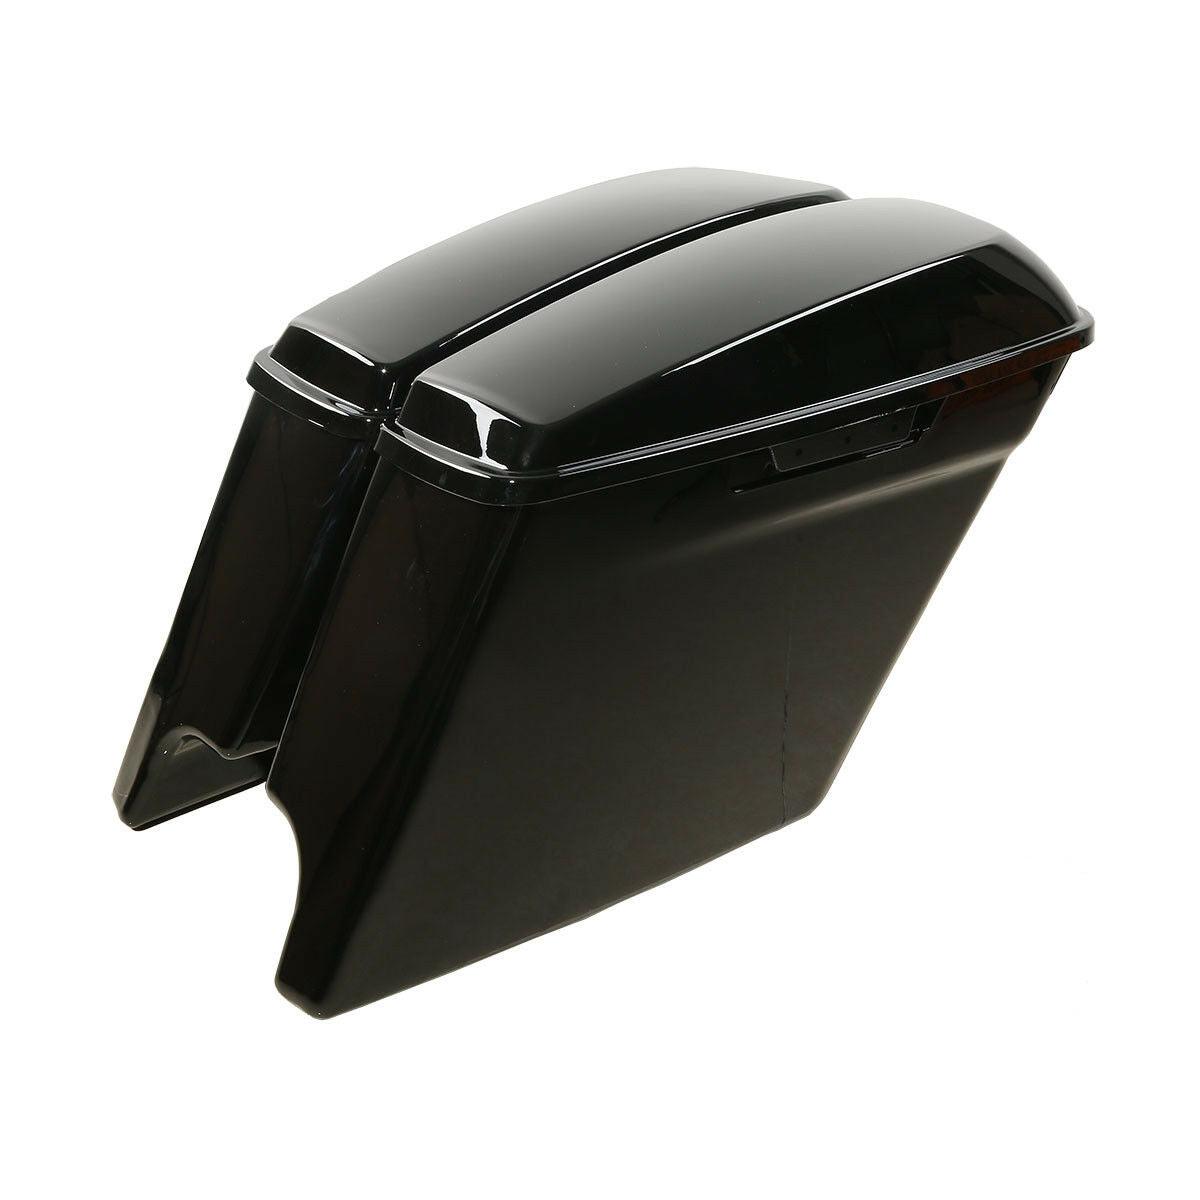 5" Stretched Extended Hard Saddlebags Fit For Harley Touring Road Glide 93-13 12 - Moto Life Products